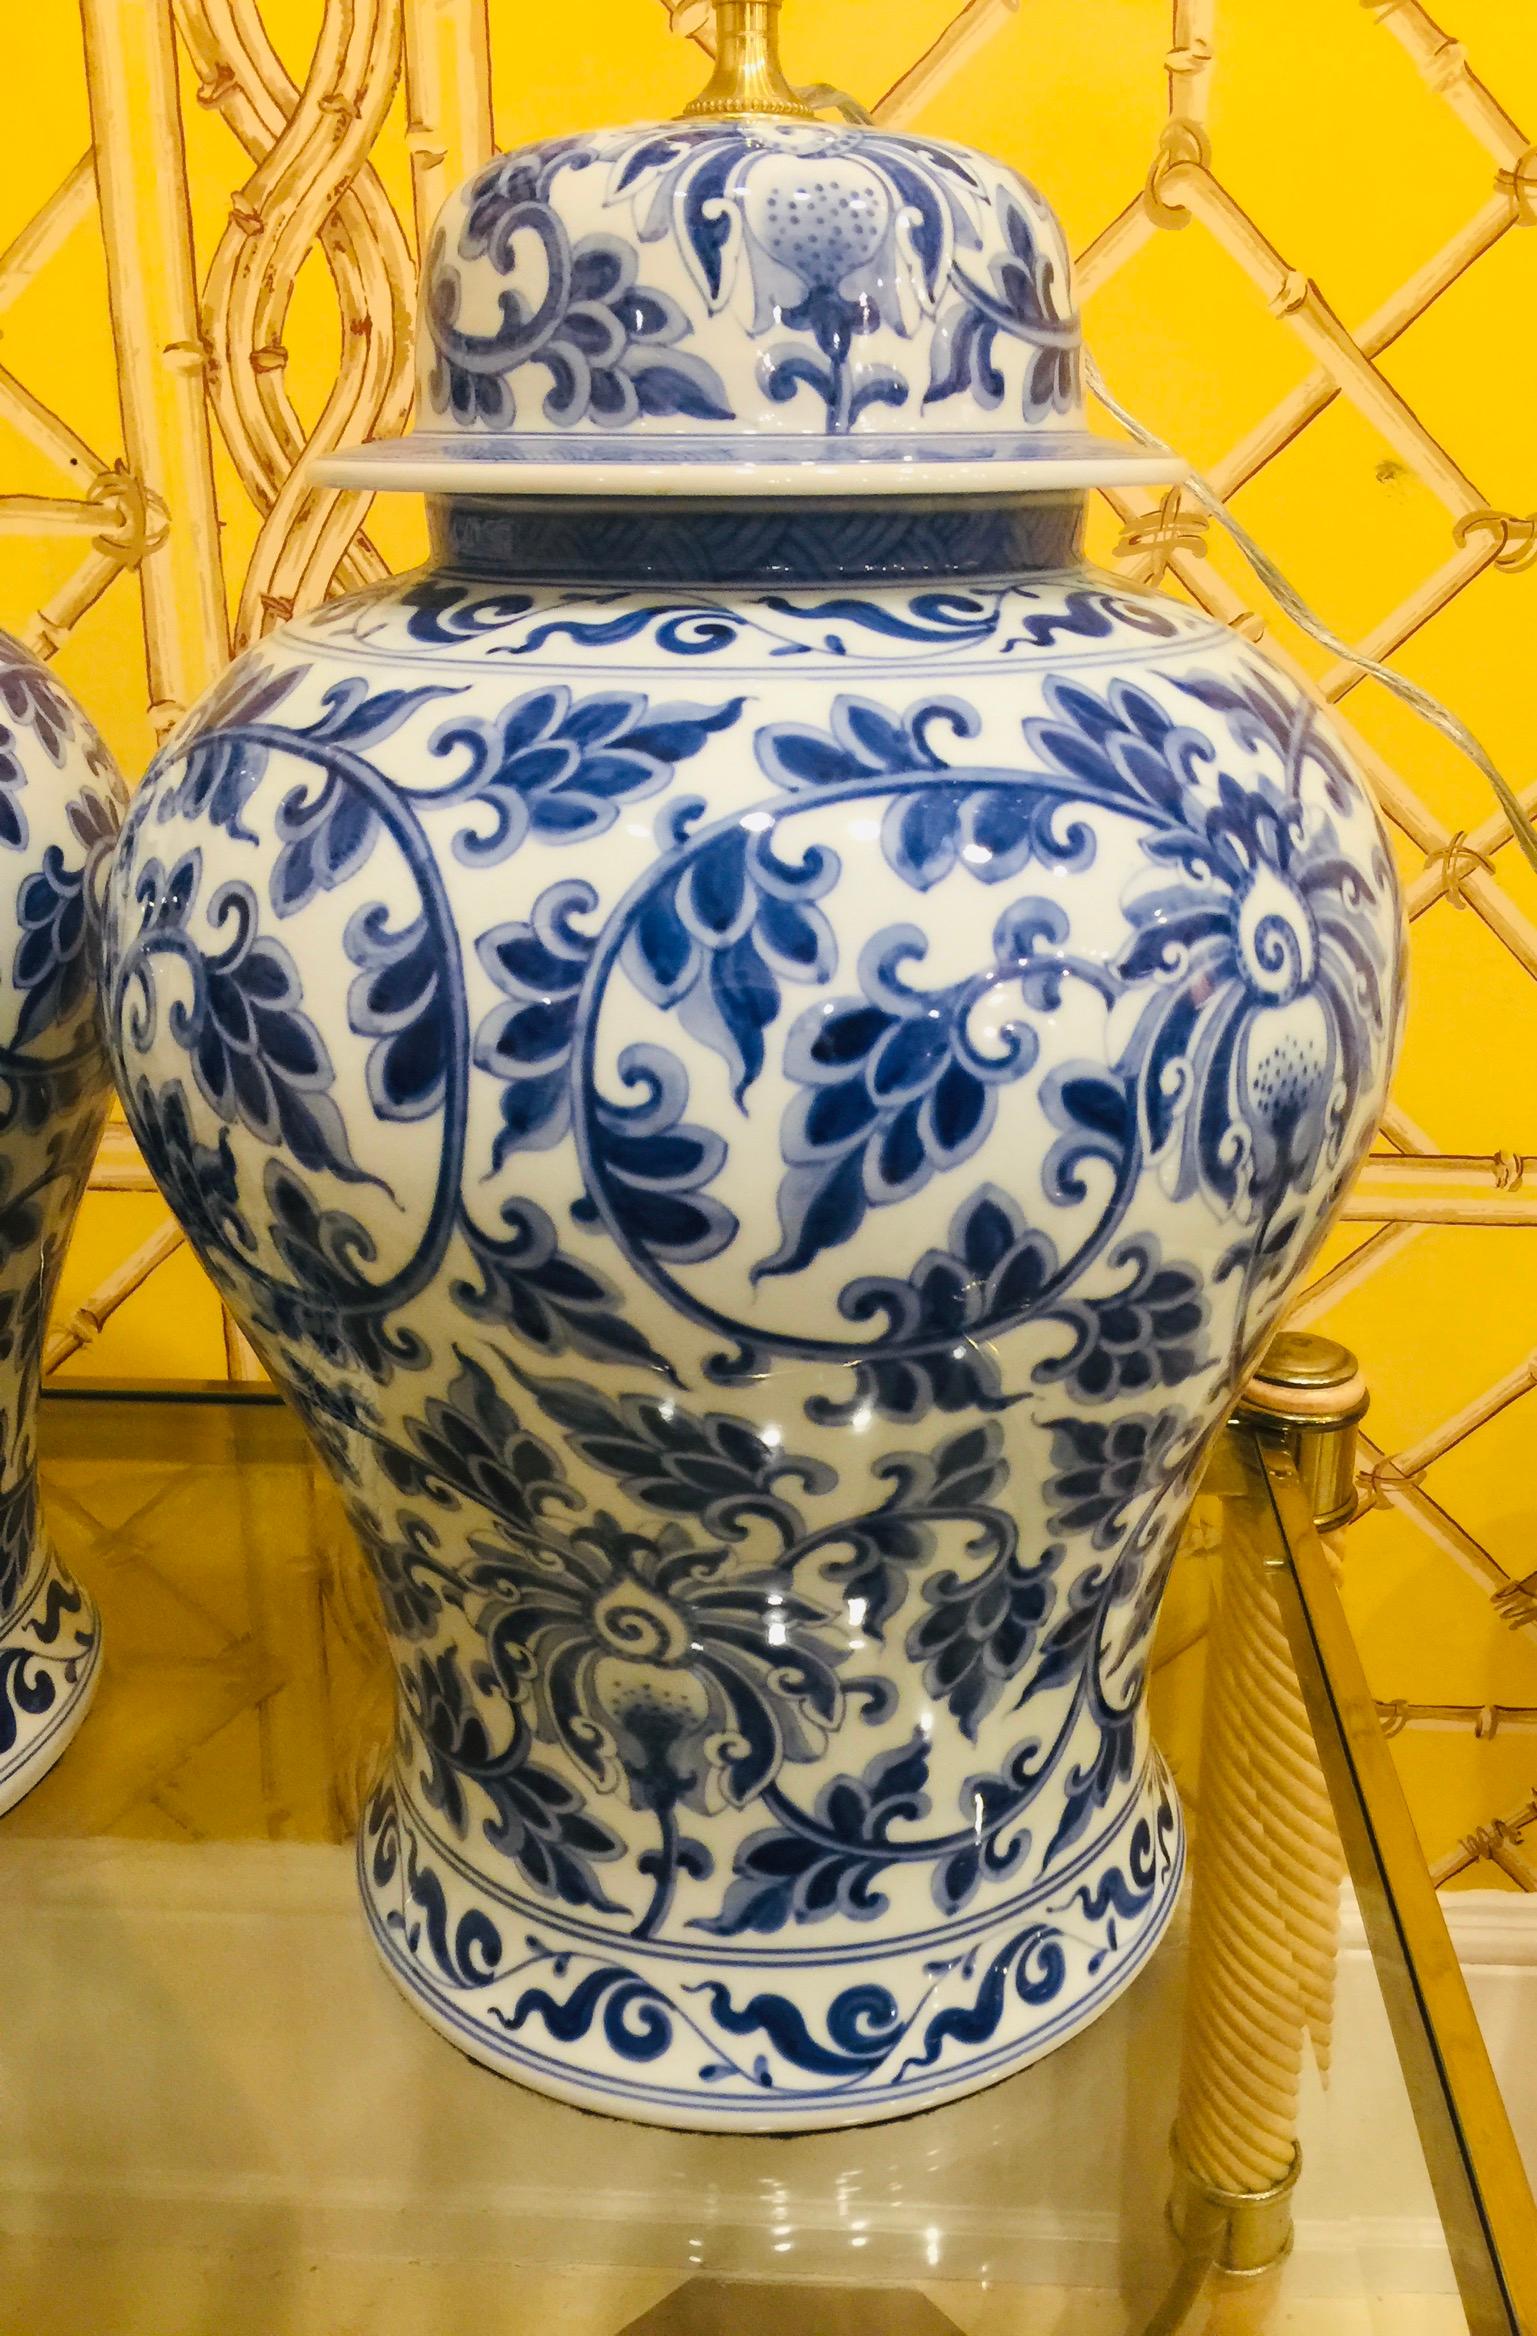 Pair of Chinese blue and white porcelain temple jar lamps
having a beautiful stylized blossom and leaf pattern, dark and light
blue coloring with original temple jar tops (new electrical work, wired from the top with wire coming out along the side